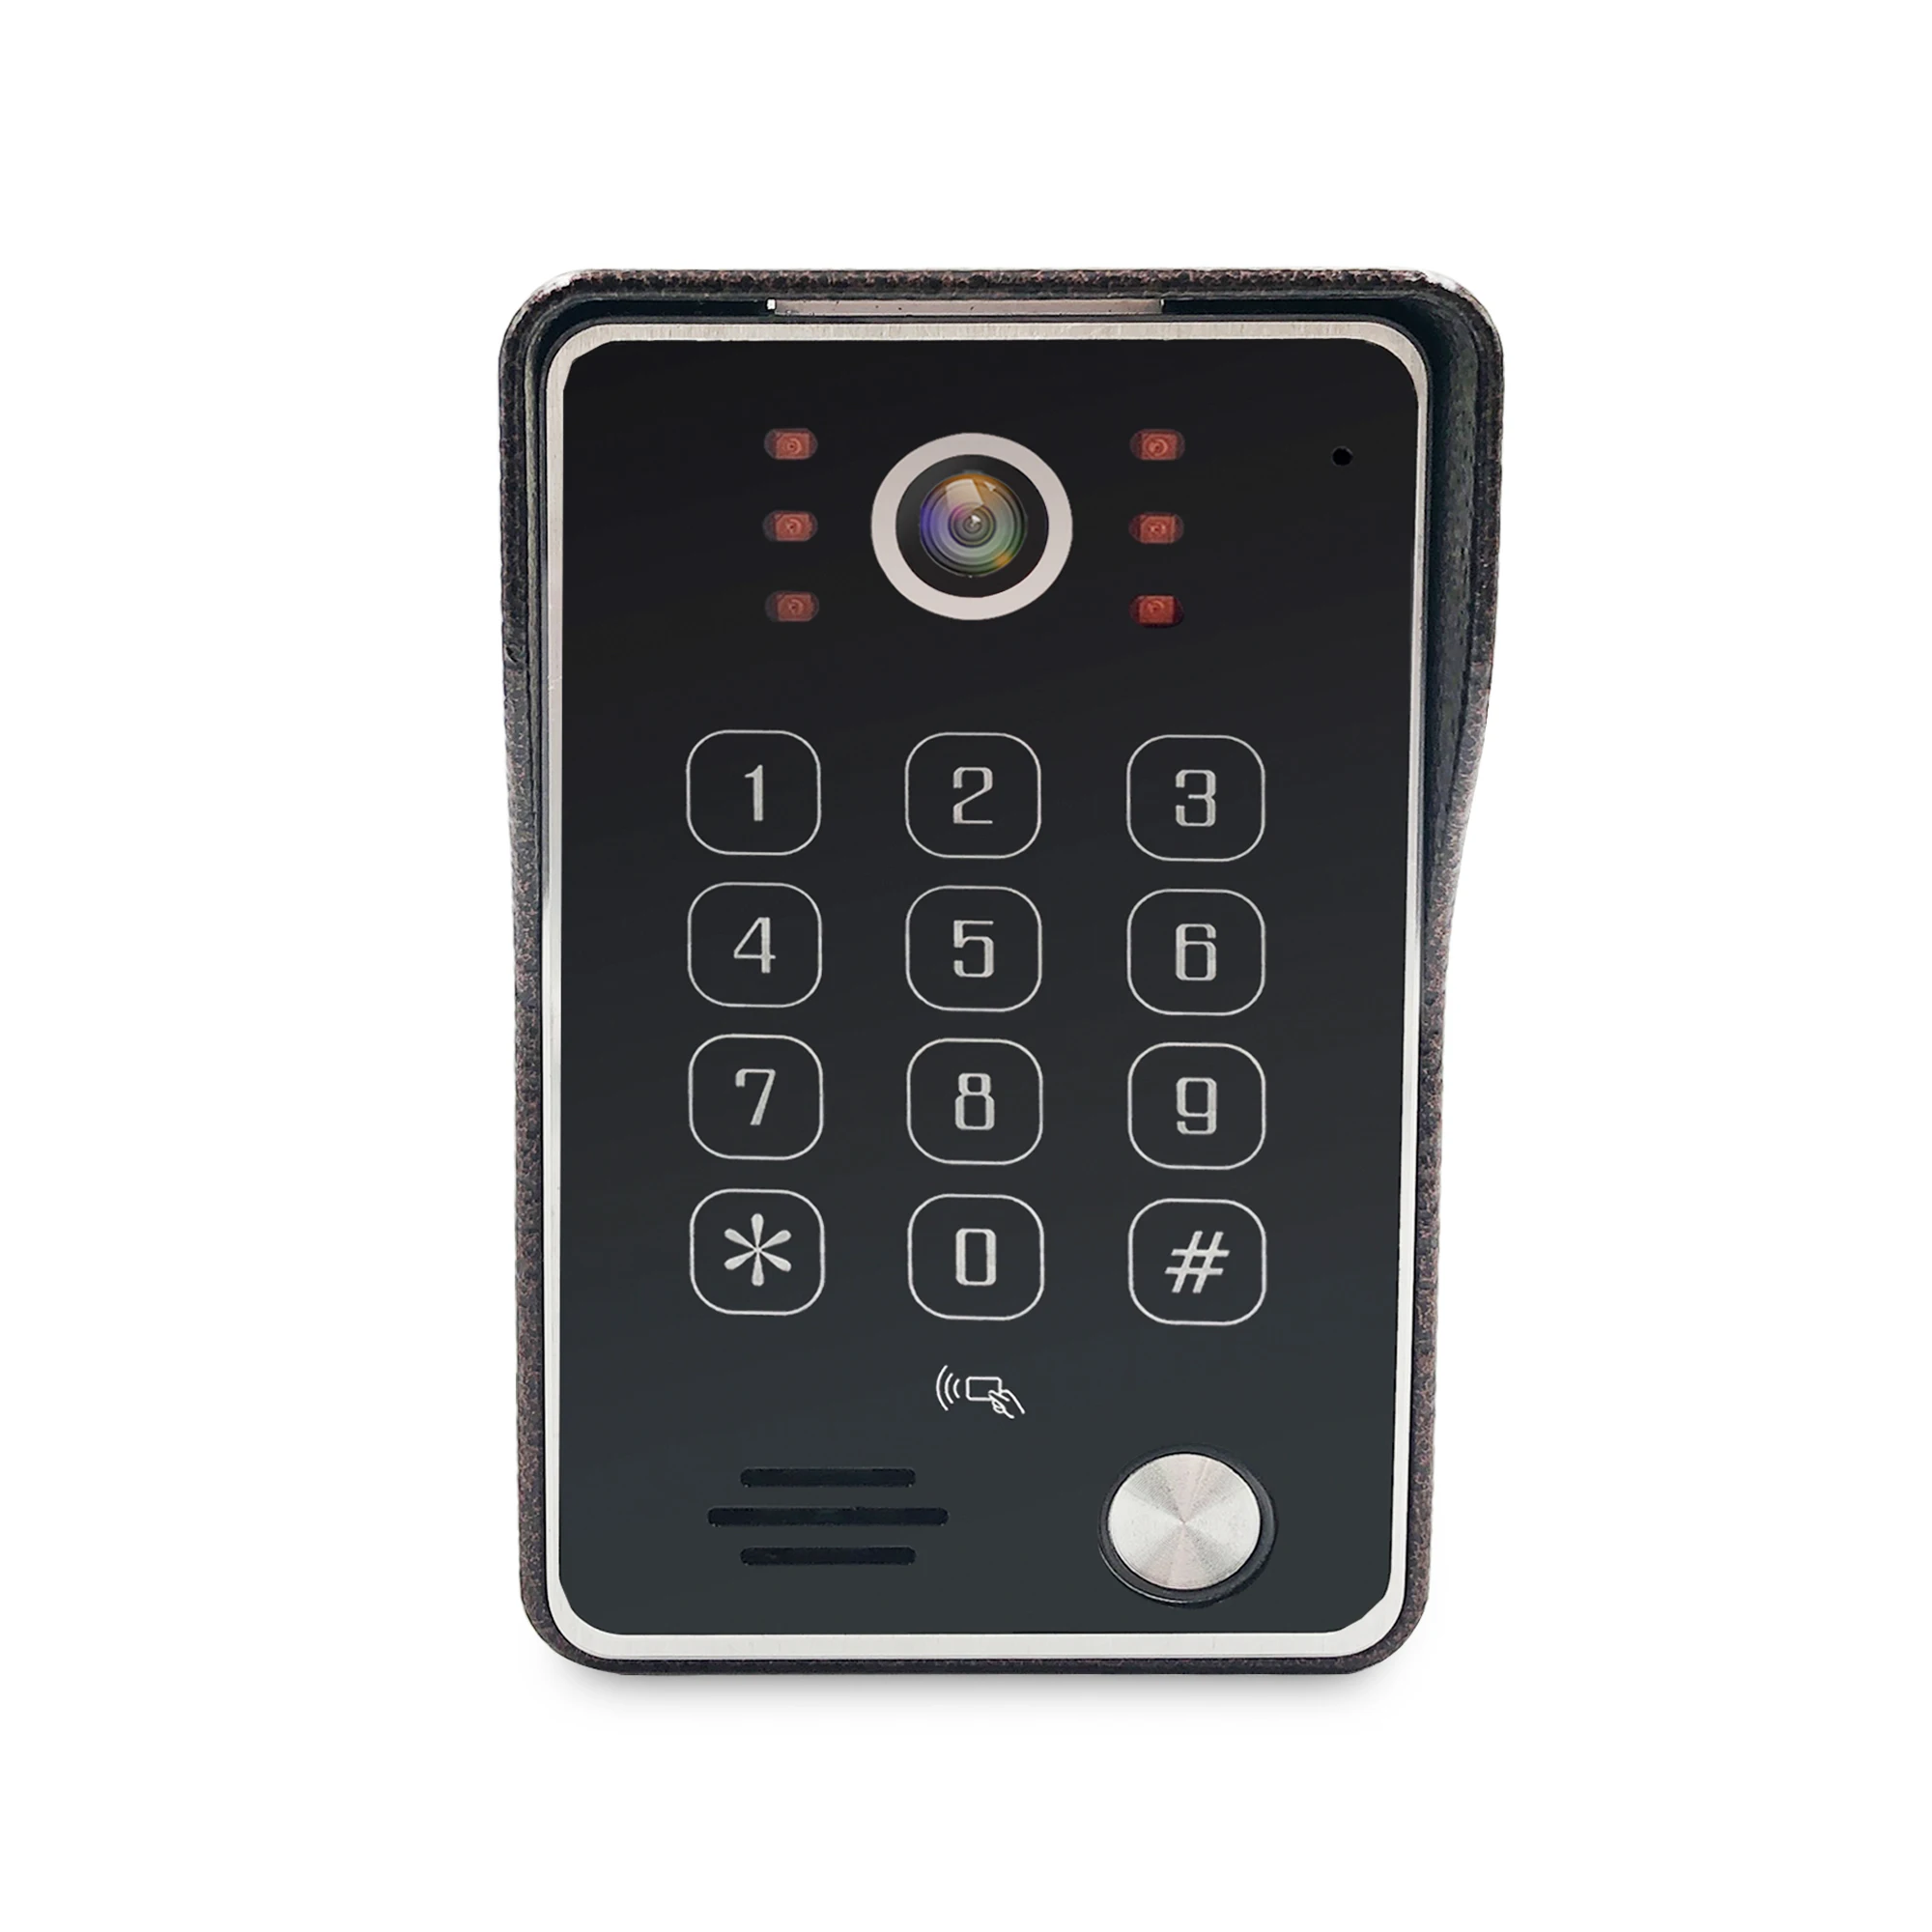 dragonsview 7 inch video door phone intercom system doorbell camera home security access control system unlock free global shipping